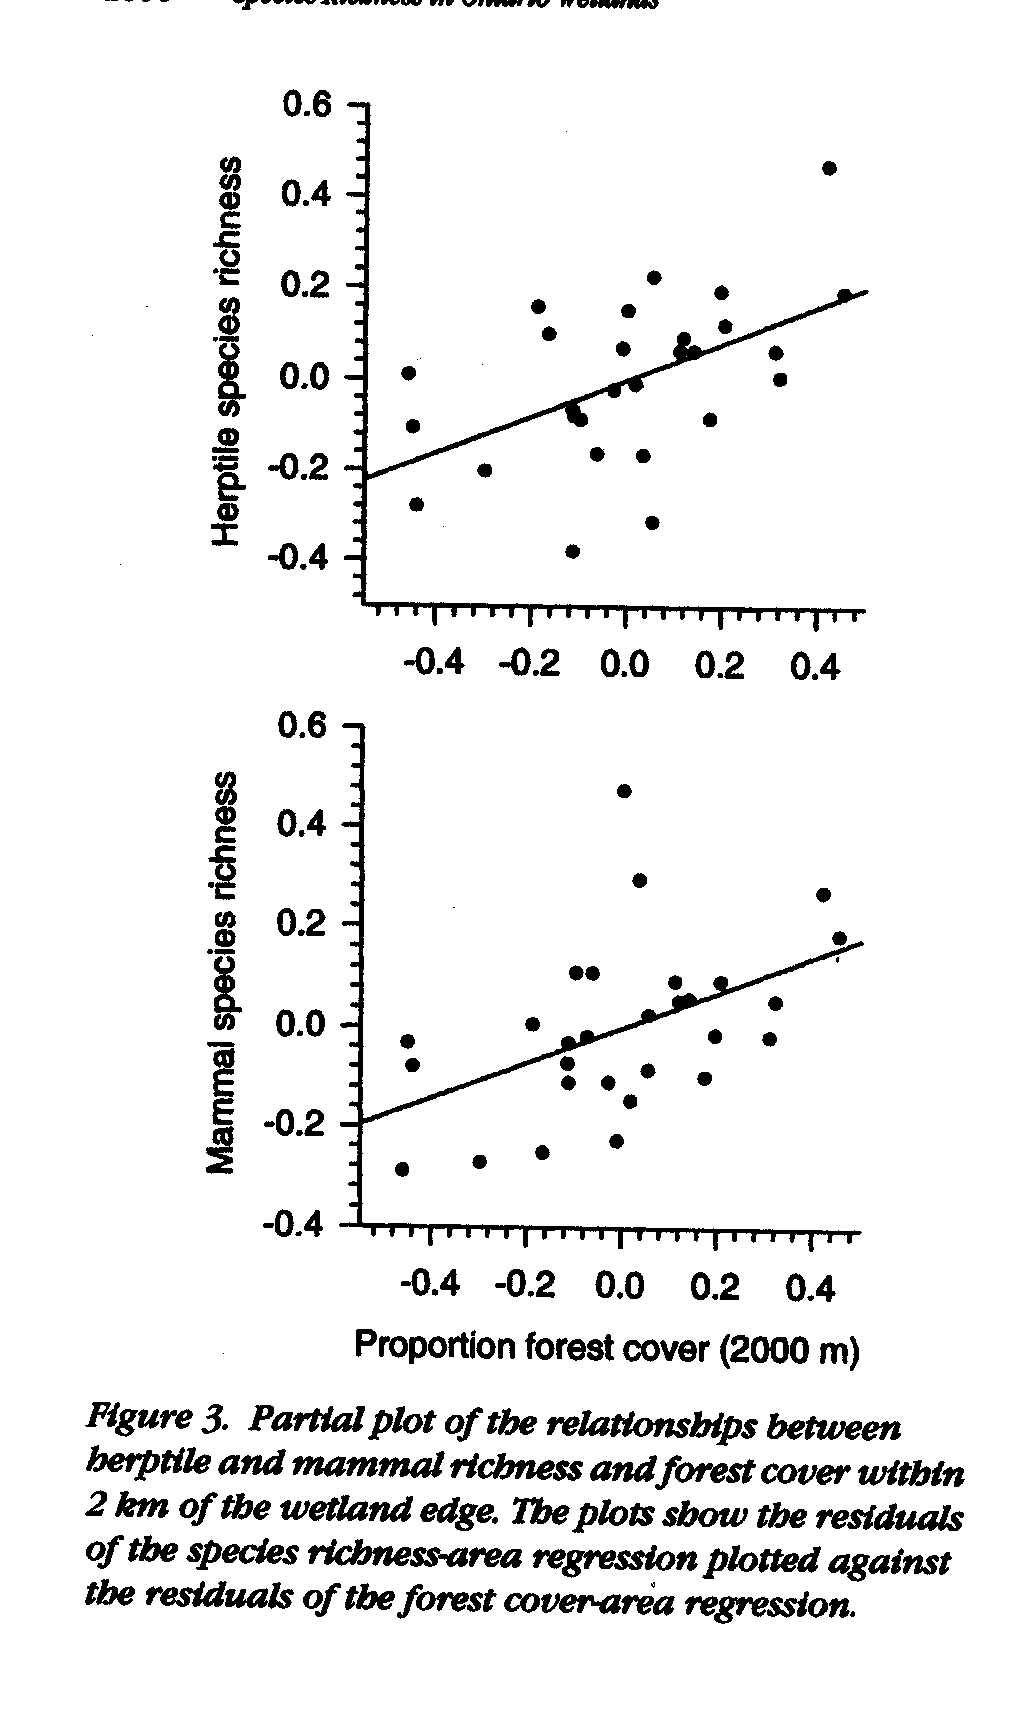 The Effects of Forest Cover on Biodiversity, Findlay and Houlahan 1997